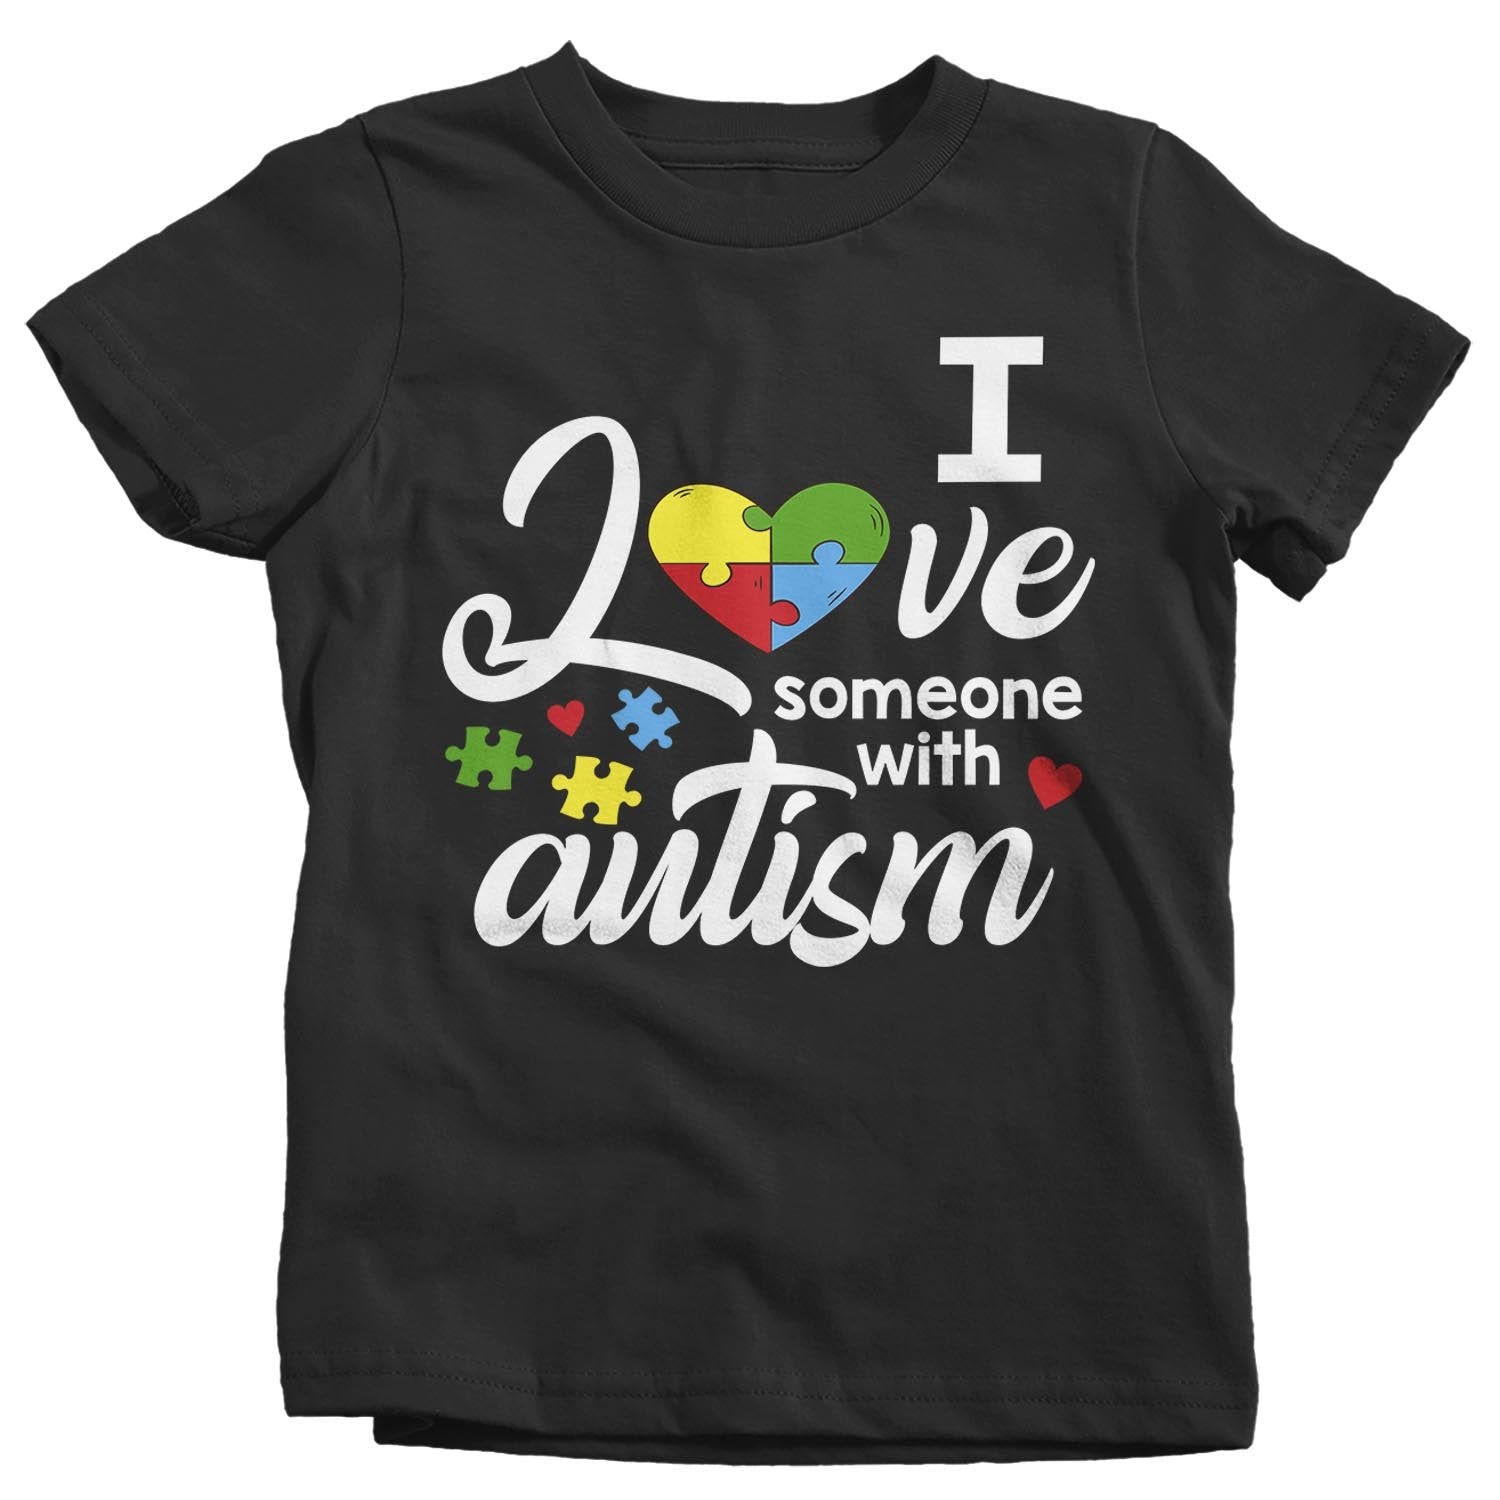 T Shirts I Love Someone With Autism T Shirt Autism Awareness Puzzle Shirts Clothing Shoes Accessories Vishawatch Com - spike chain t shirt roblox